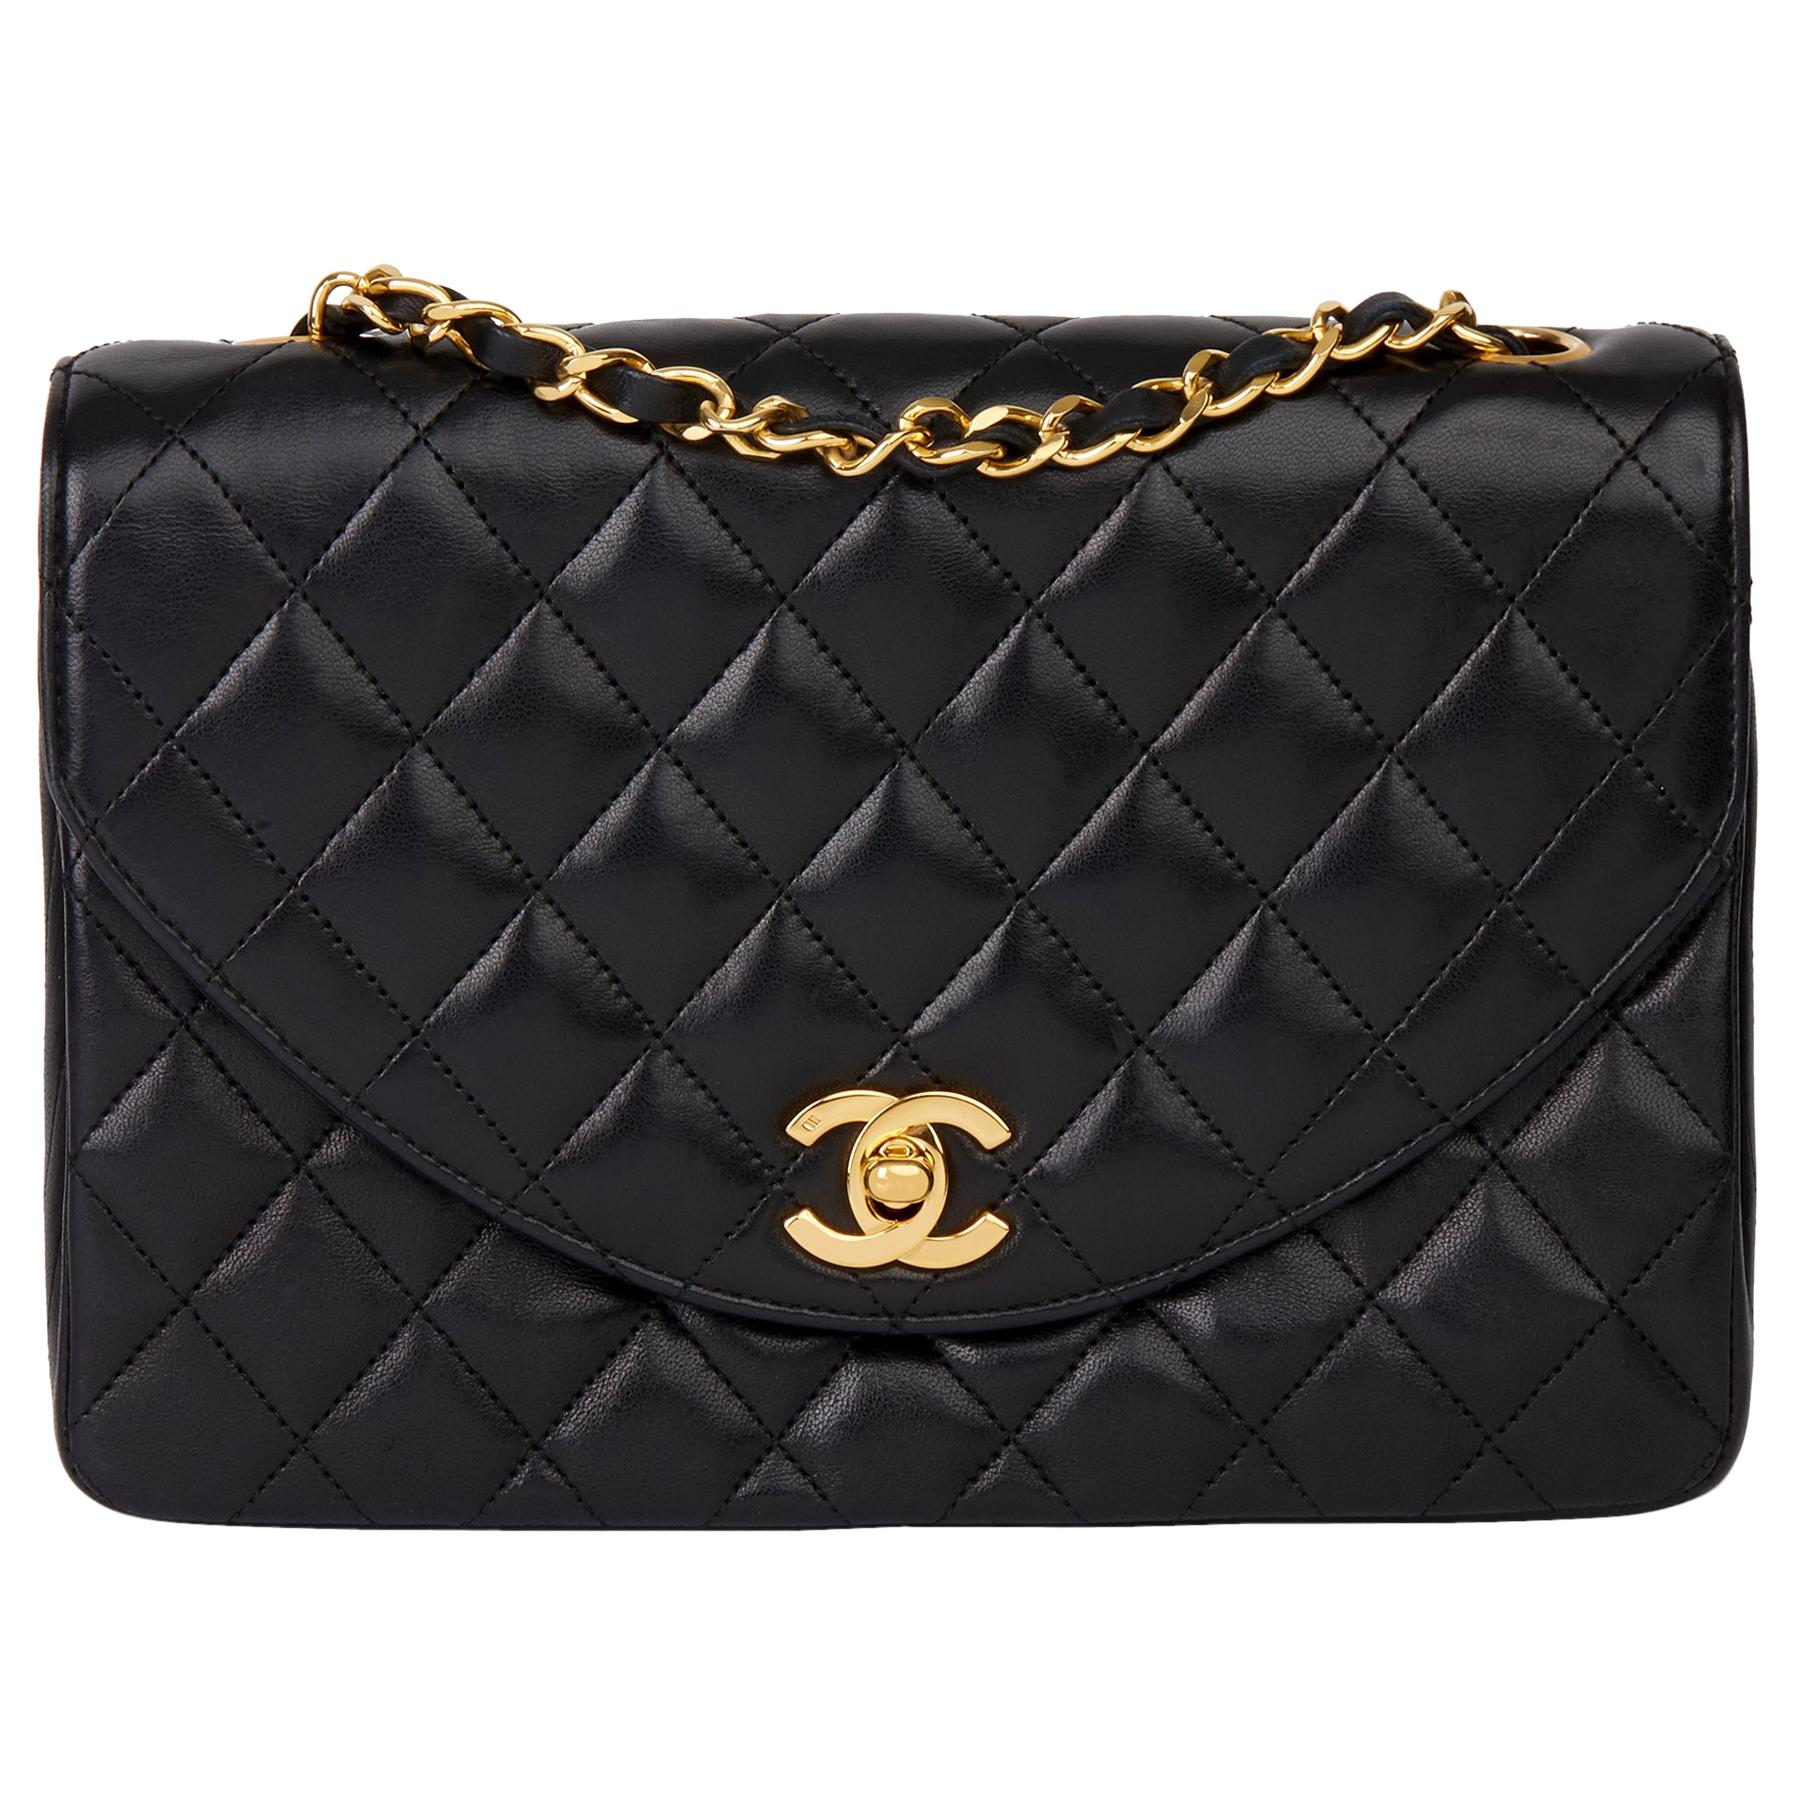 1988 Chanel Black Quilted Lambskin Vintage Classic Single Flap Bag